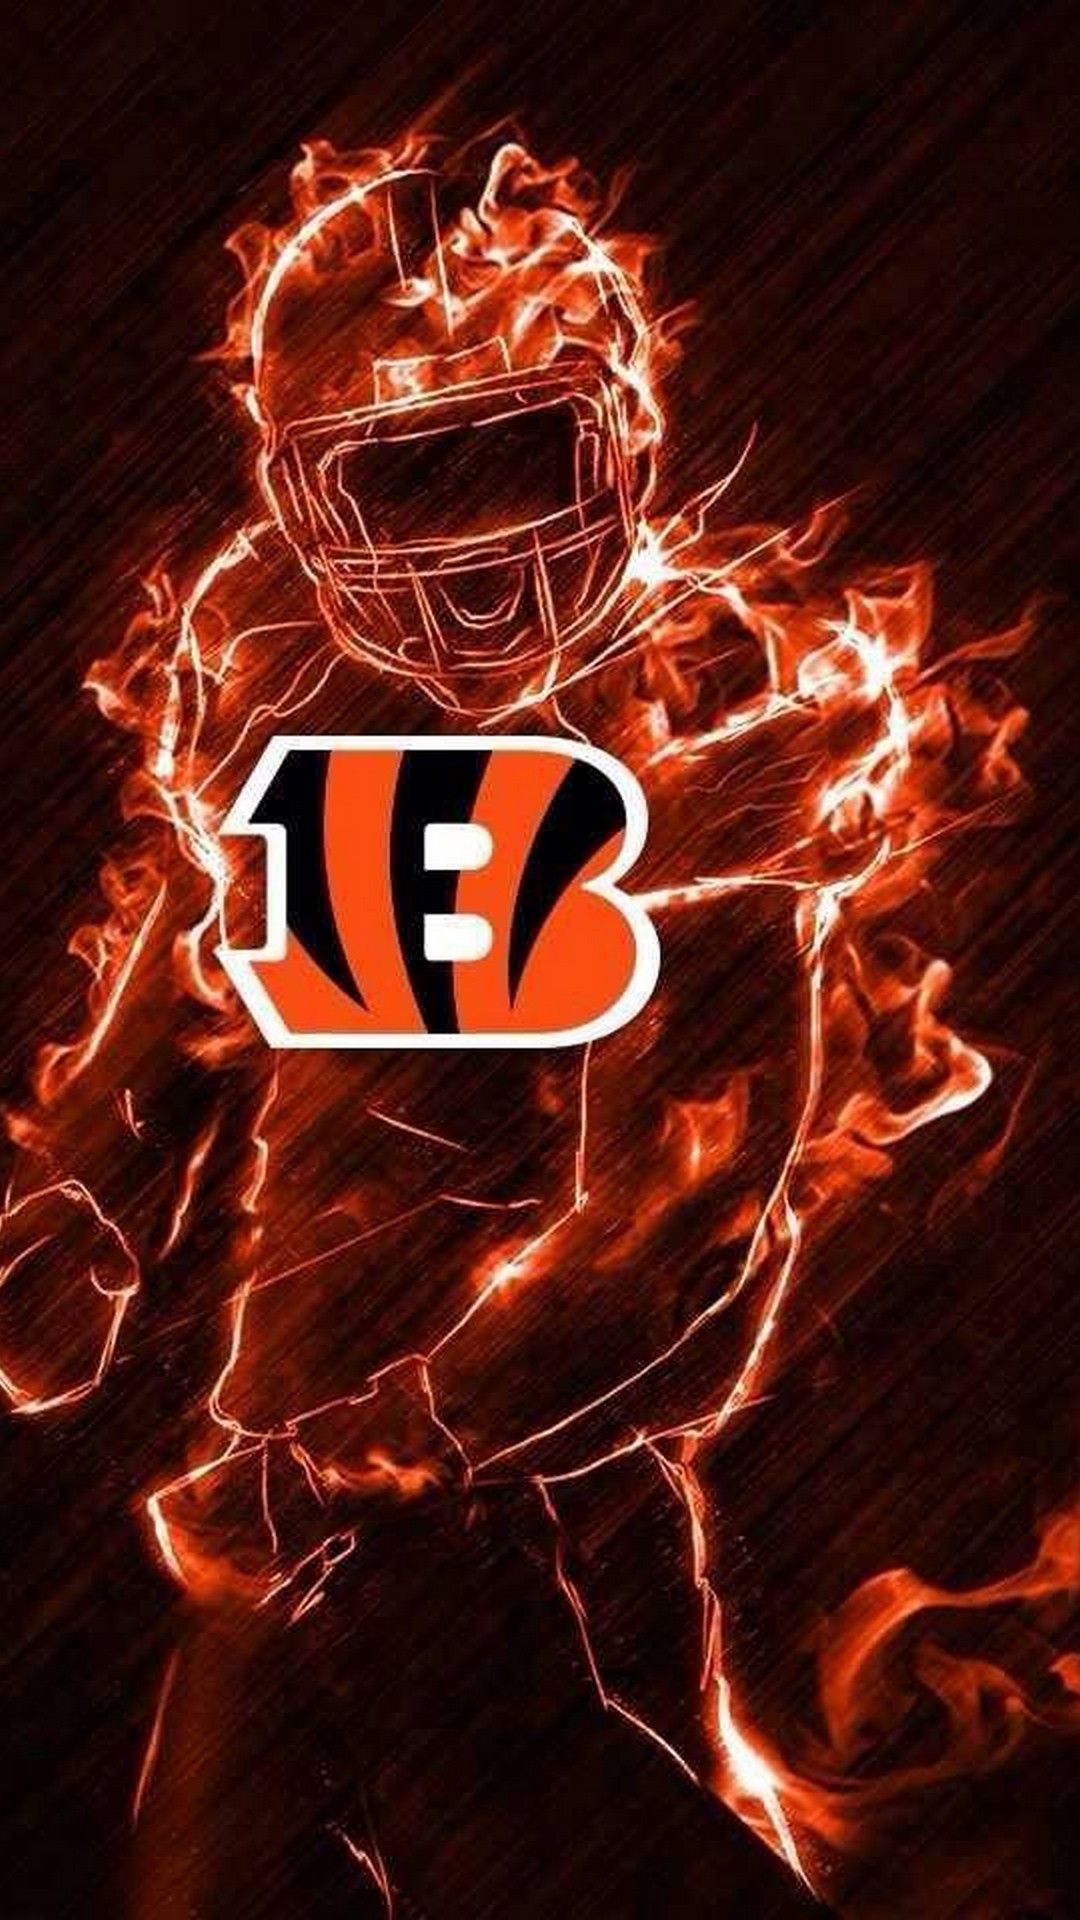 Cincinnati Bengals Wallpaper For Android posted by Ryan Johnson